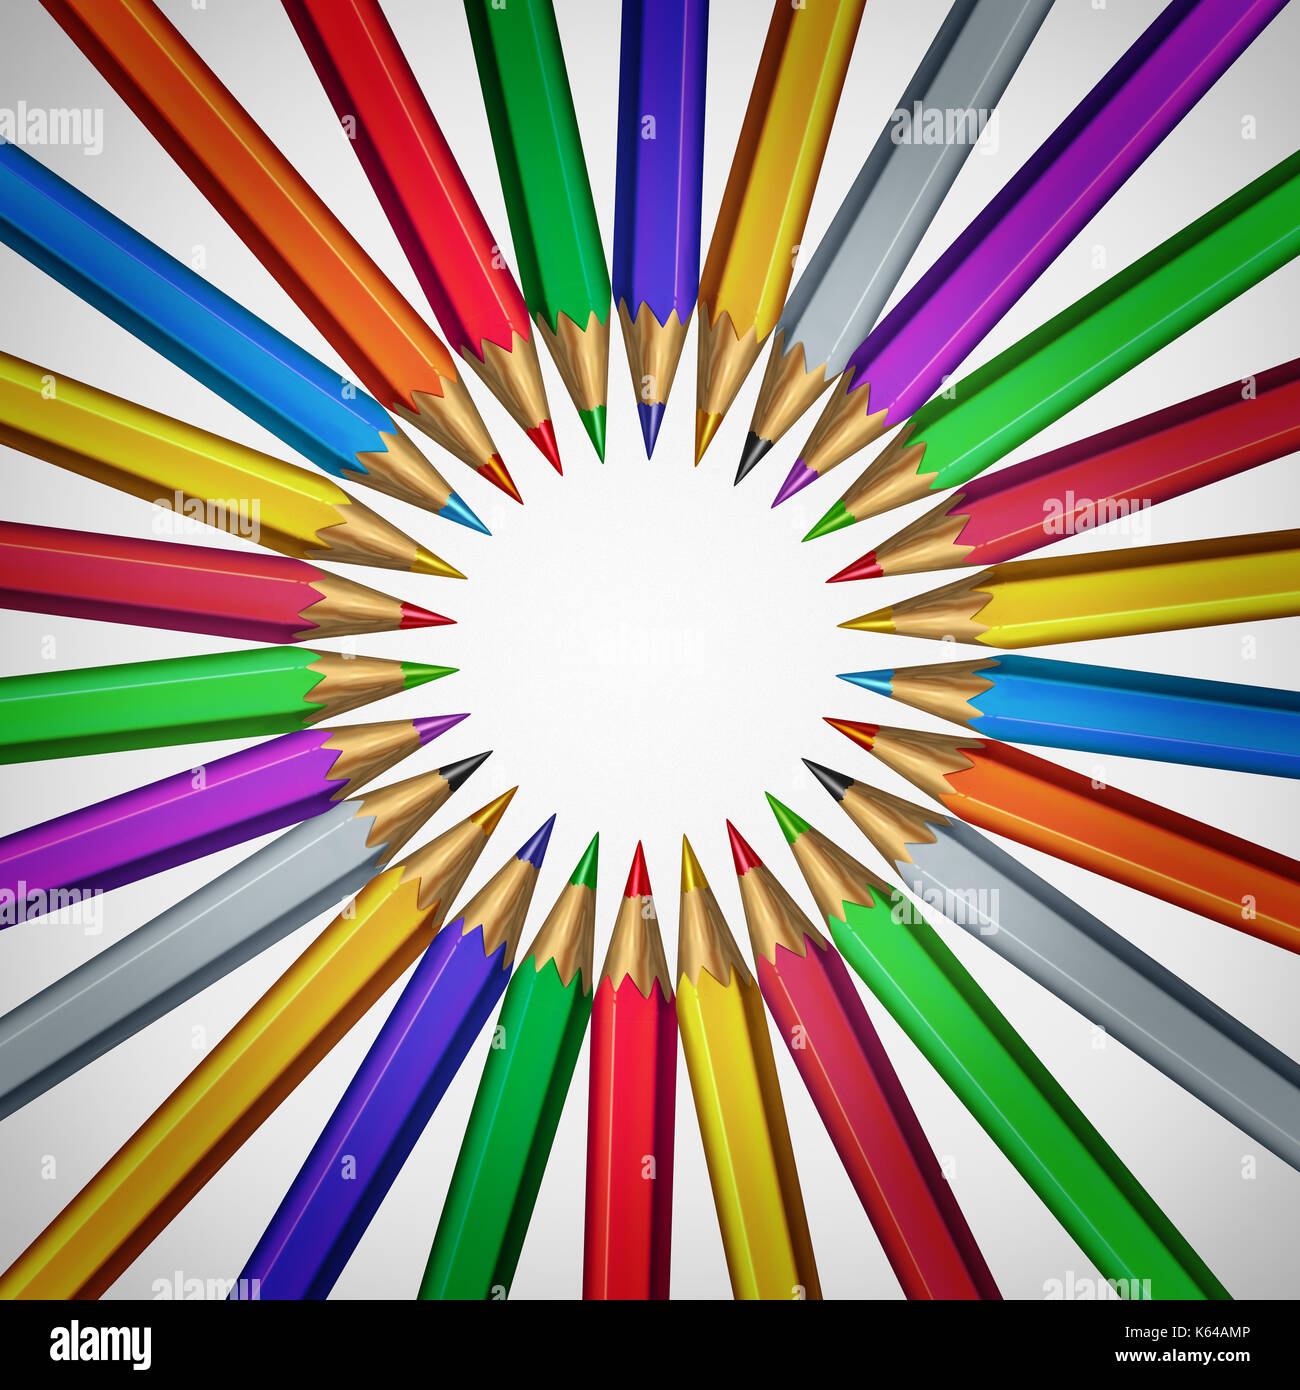 Arts and crafts central design with color pencils as a creative abstract circular graphic with center blank area as a 3D illustration. Stock Photo